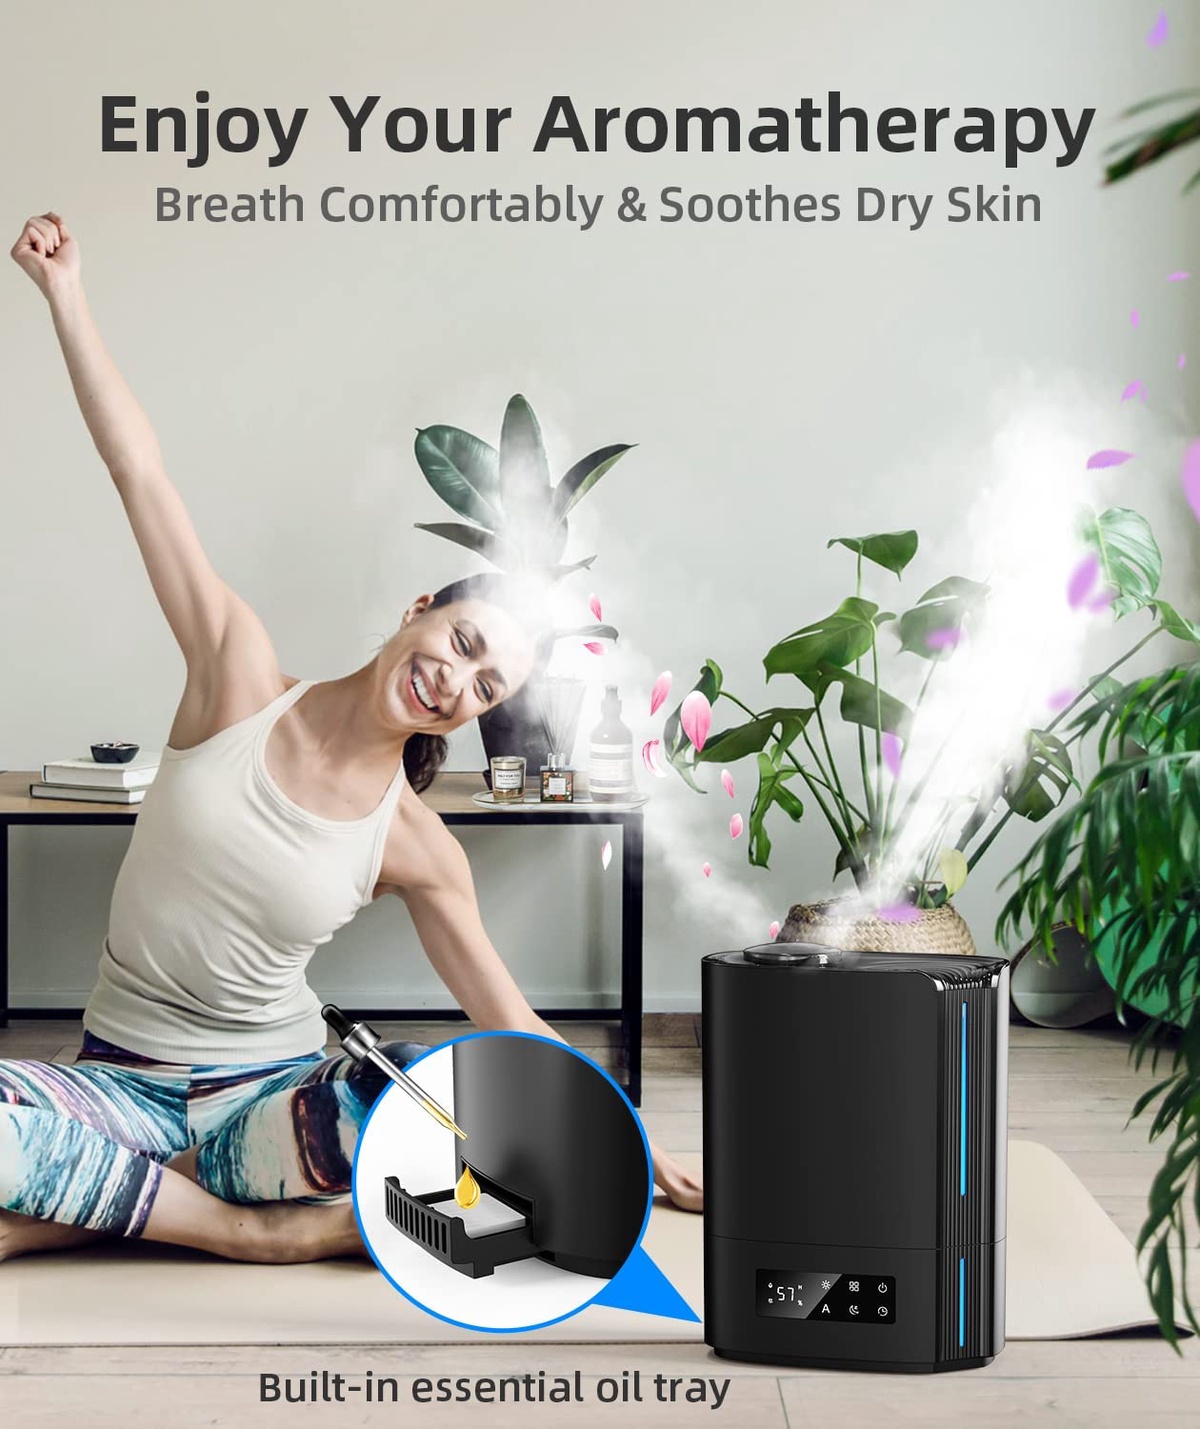 BREEZOME 6L Humidifier in Black is a powerful and versatile humidification solution for bedrooms and large rooms.